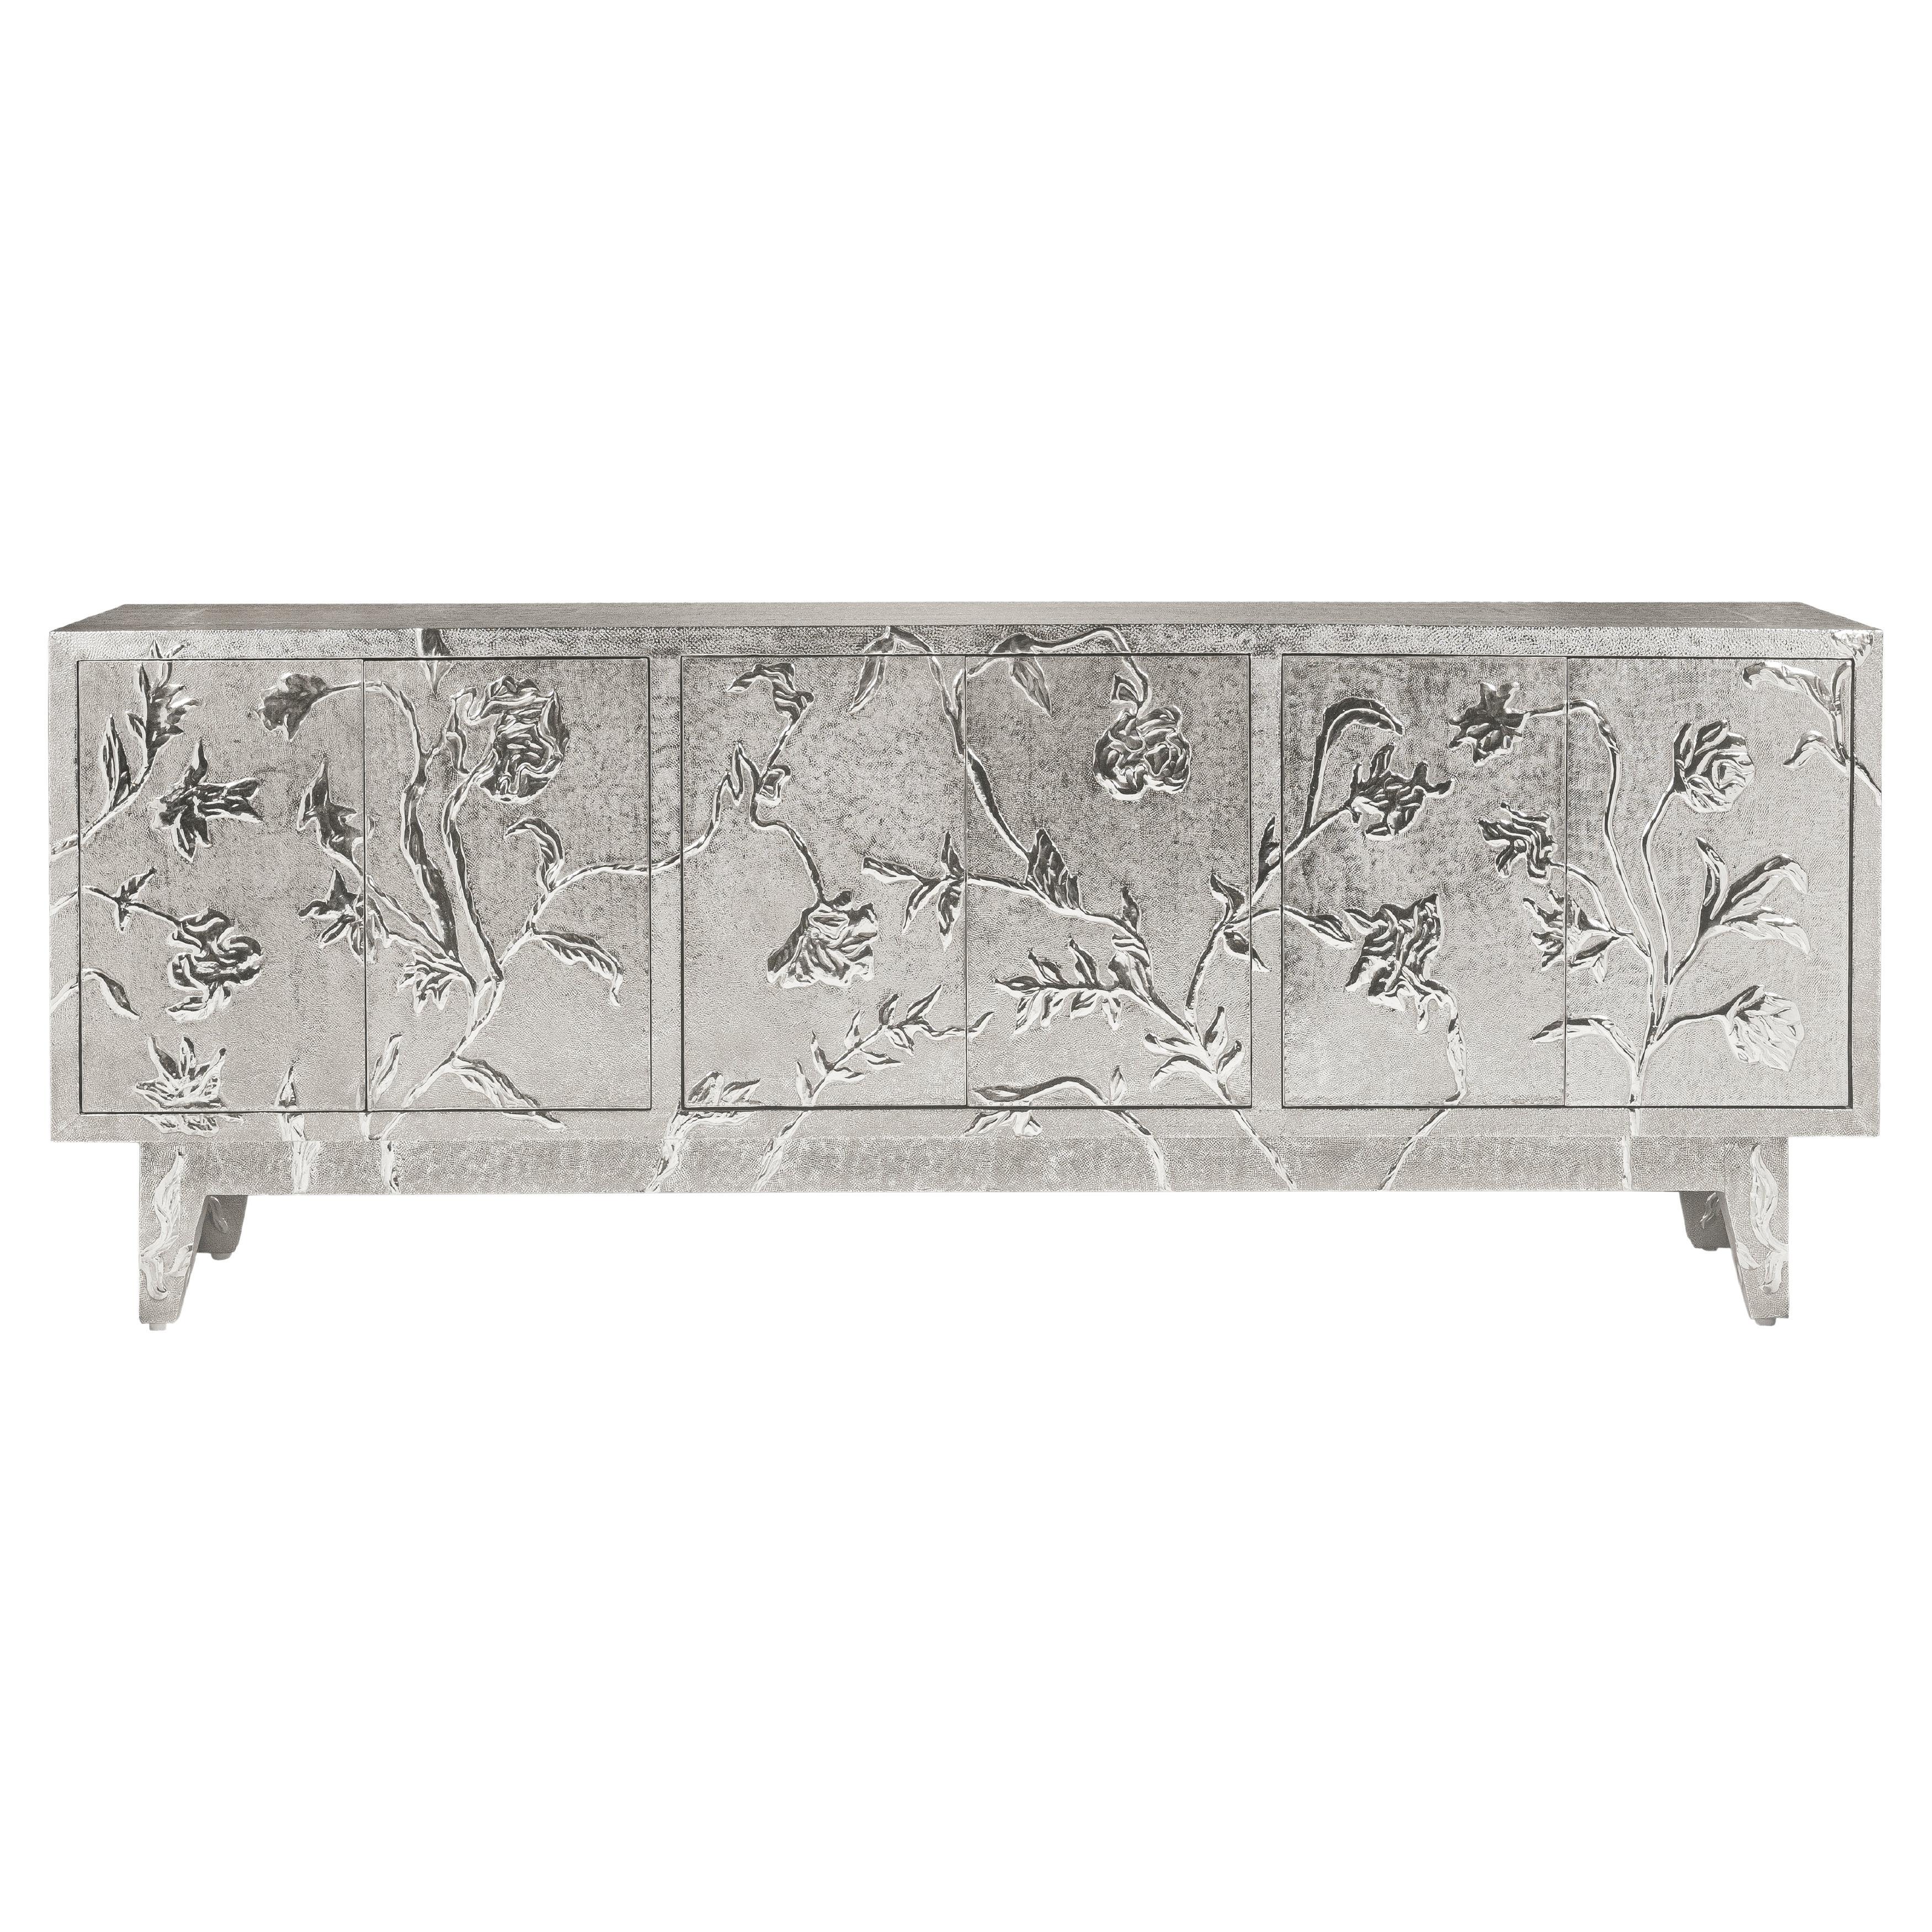 Art Deco Credenza in Floral Design by Stephanie Odegard